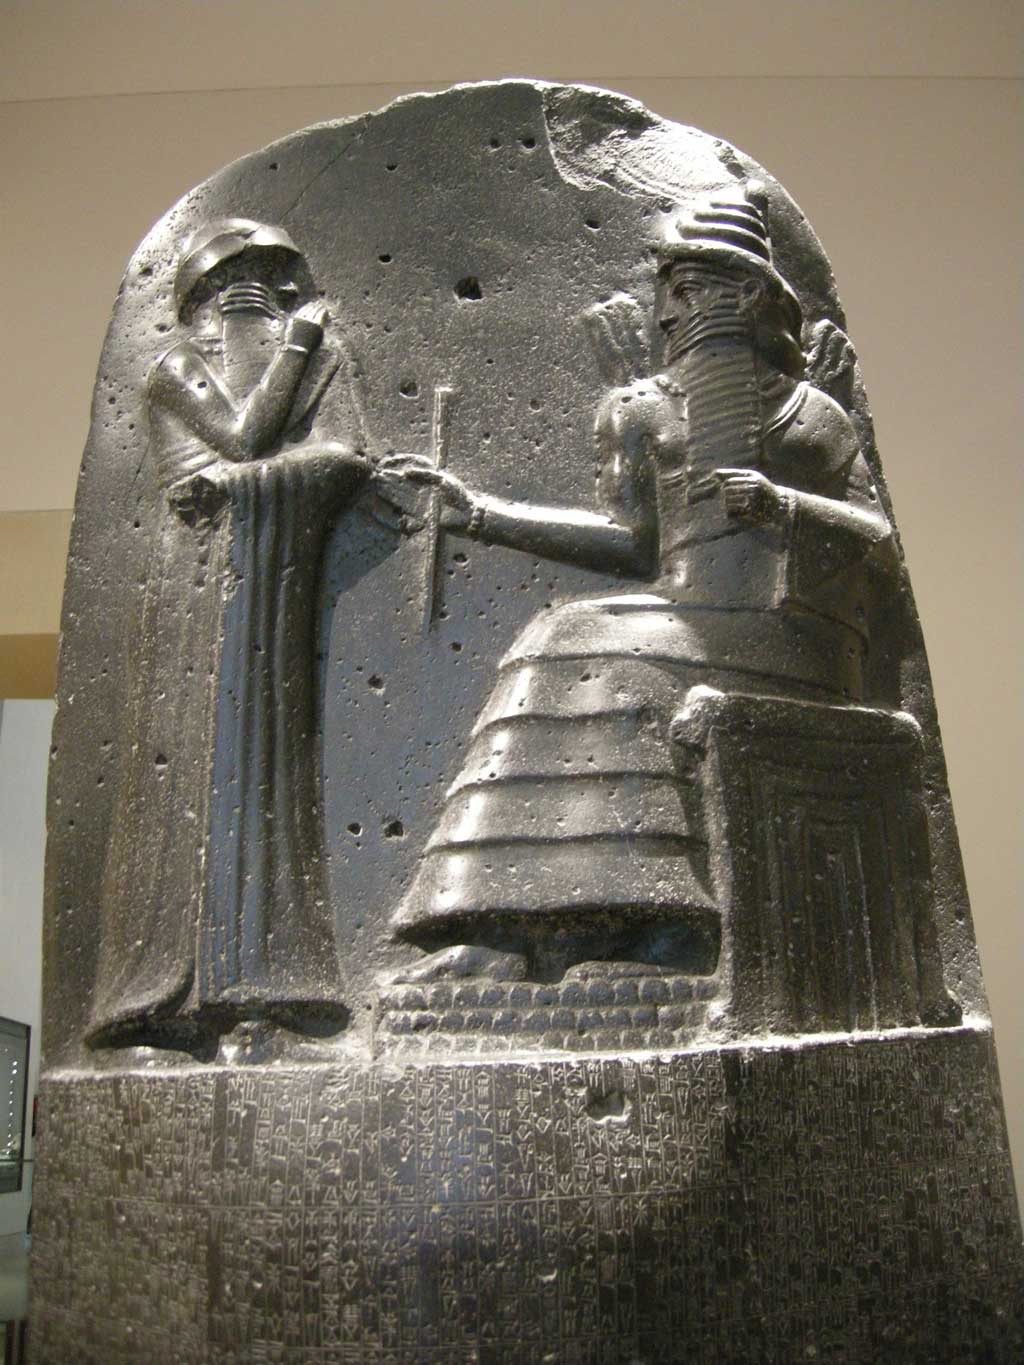 Picture of Hammurabi's Code. A dark cylindrical stone statue with a carving on the upper portion of the Code. Here, one sees a representation of king Hammurabi receiving his law code from the god Shamash who sits before him. Both are two-dimensional in form.